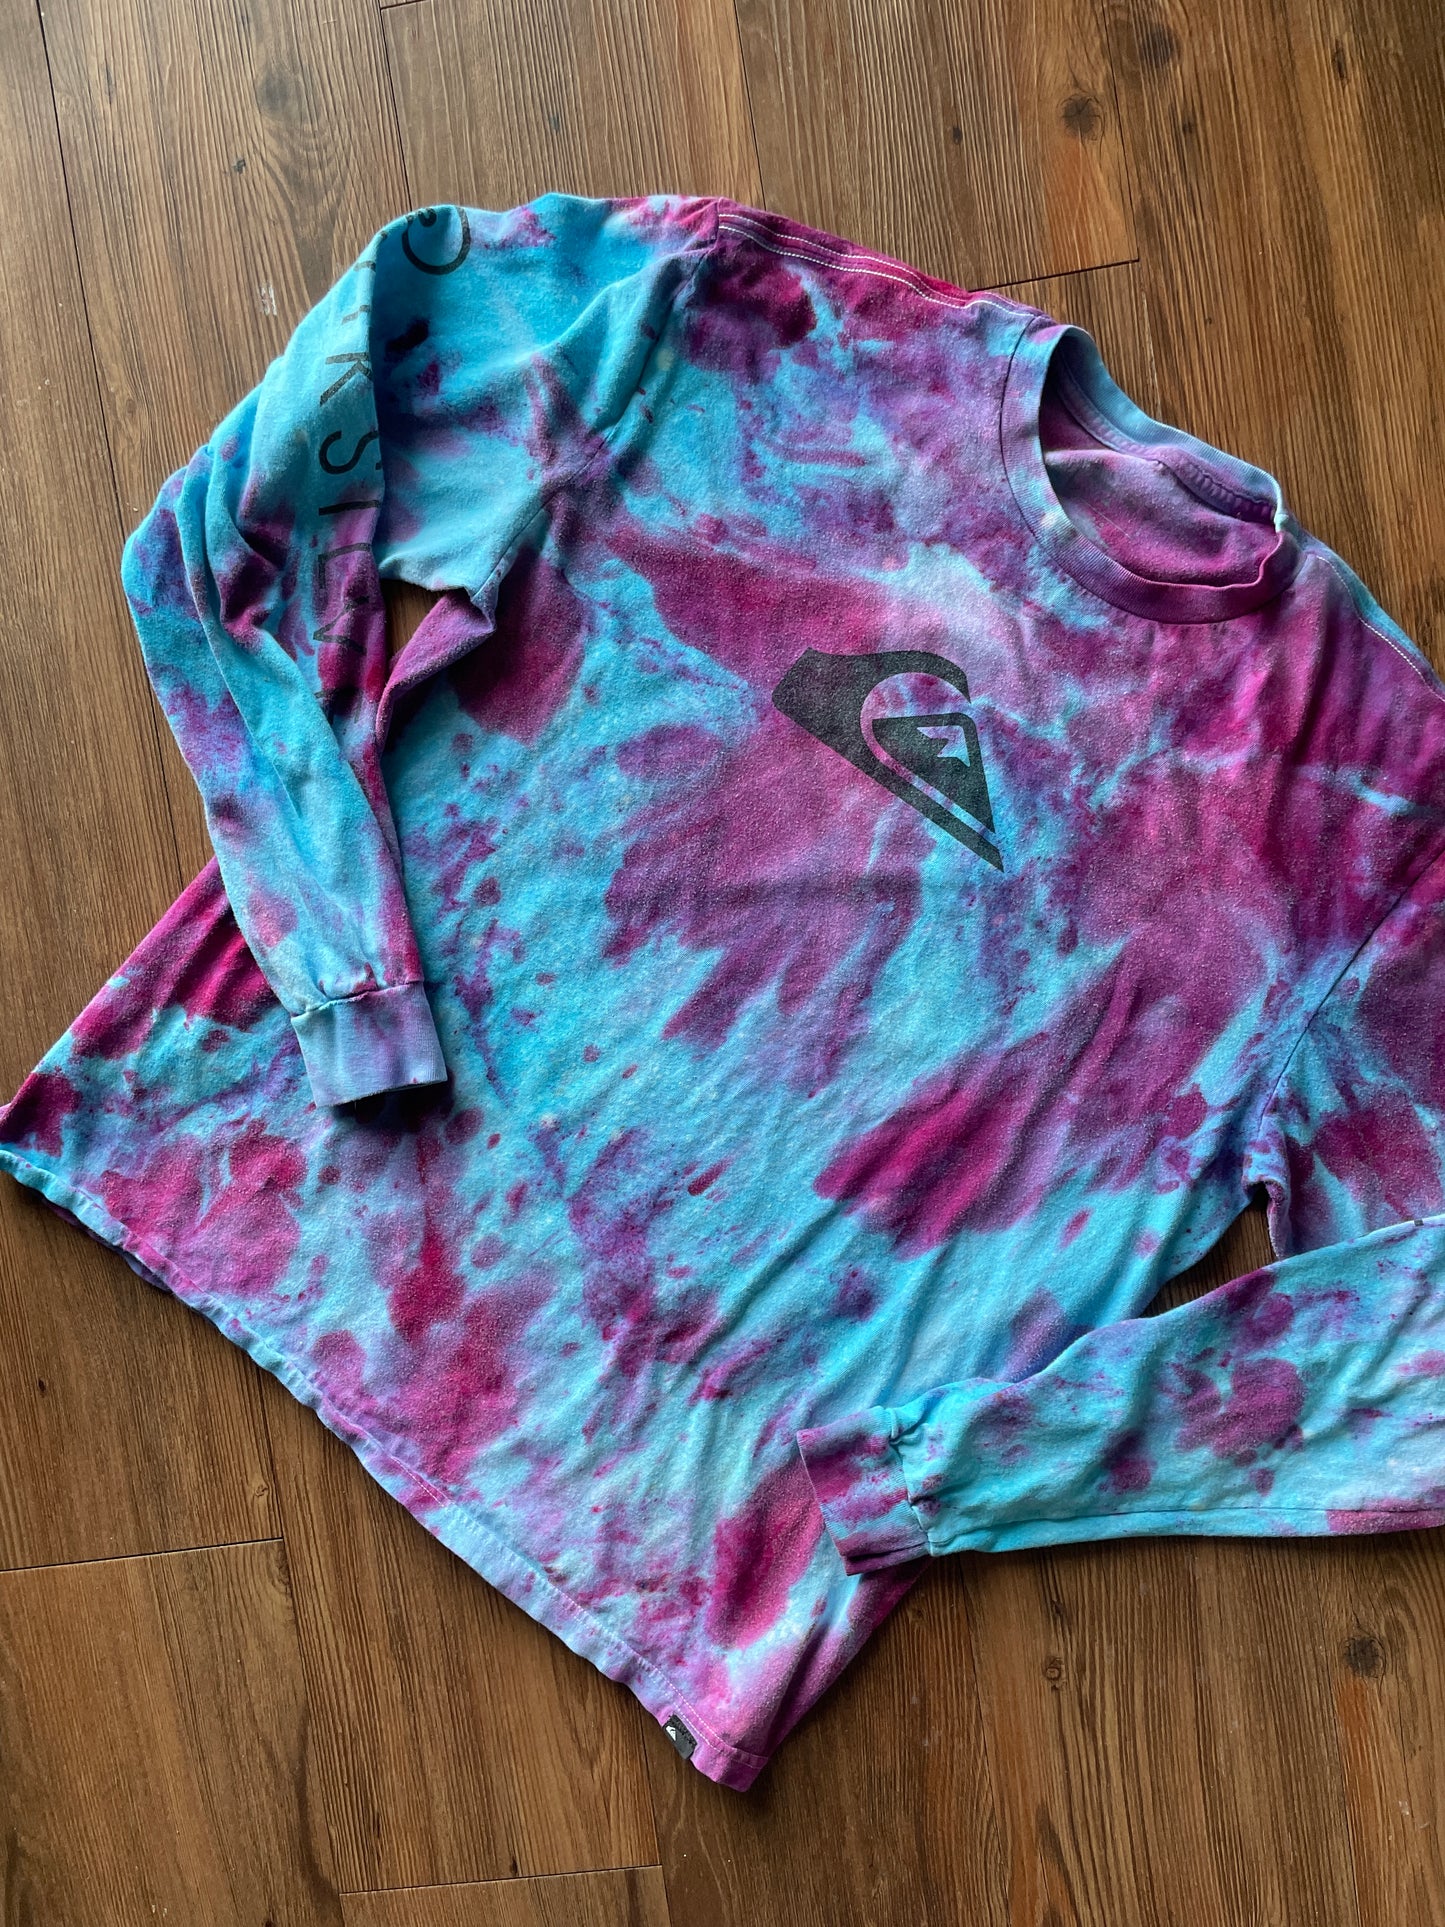 LARGE Men’s Quiksilver Galaxy Handmade Tie Dye T-Shirt | One-Of-a-Kind Blue and Pink Snow Dyed Long Sleeve